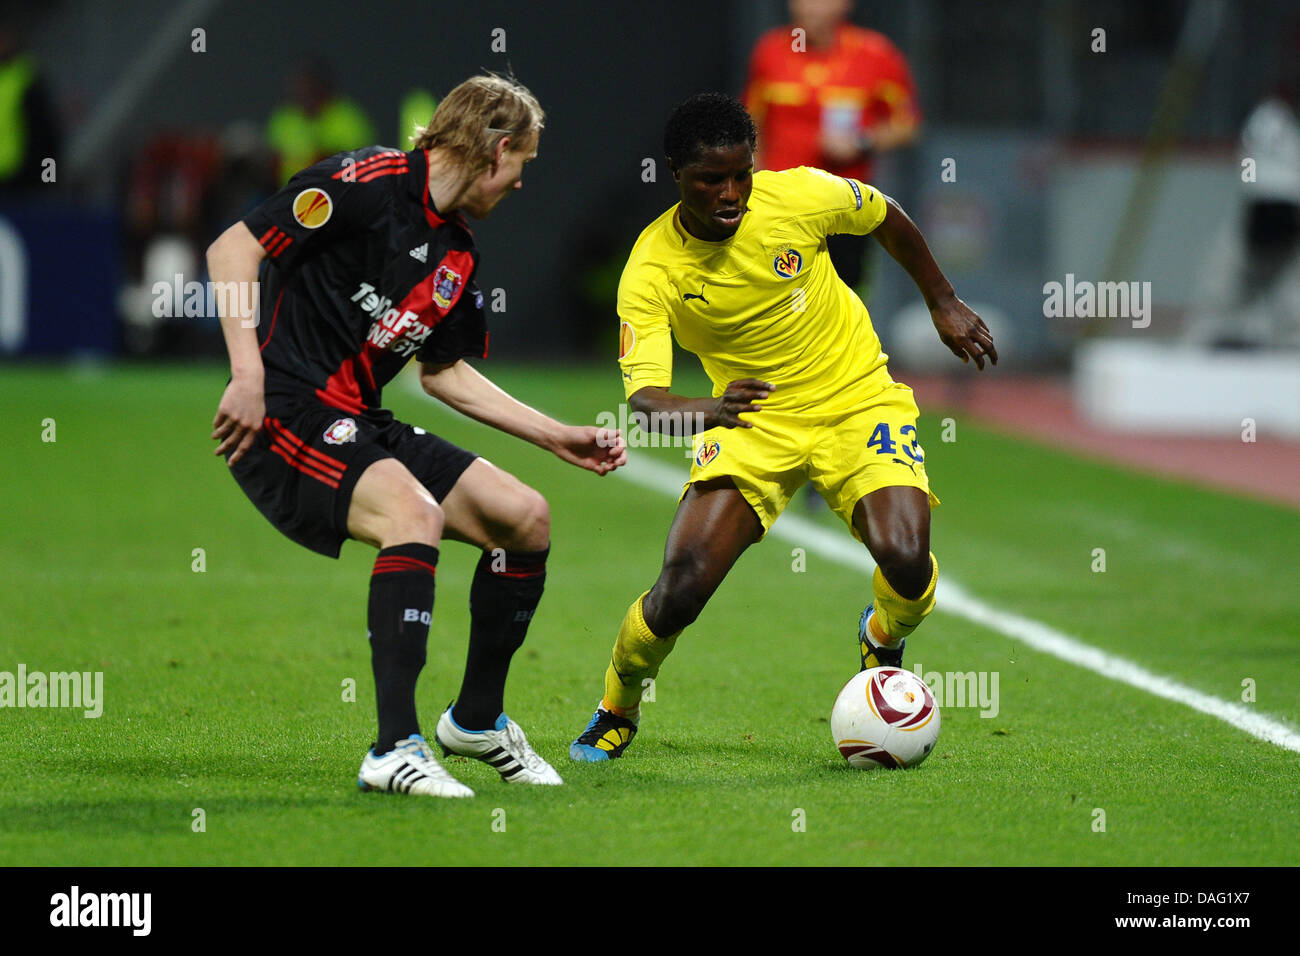 The picture shows the FC Villarreal player Wakaso Mubarak (R) and Leverkusen player Domagoj Vida (L) vie for the ball in the Eight Finale Champions League Game against Bayer Leverkusen, in Leverkusen, Germany on 10 march 2011. Photo: Revierfoto Stock Photo